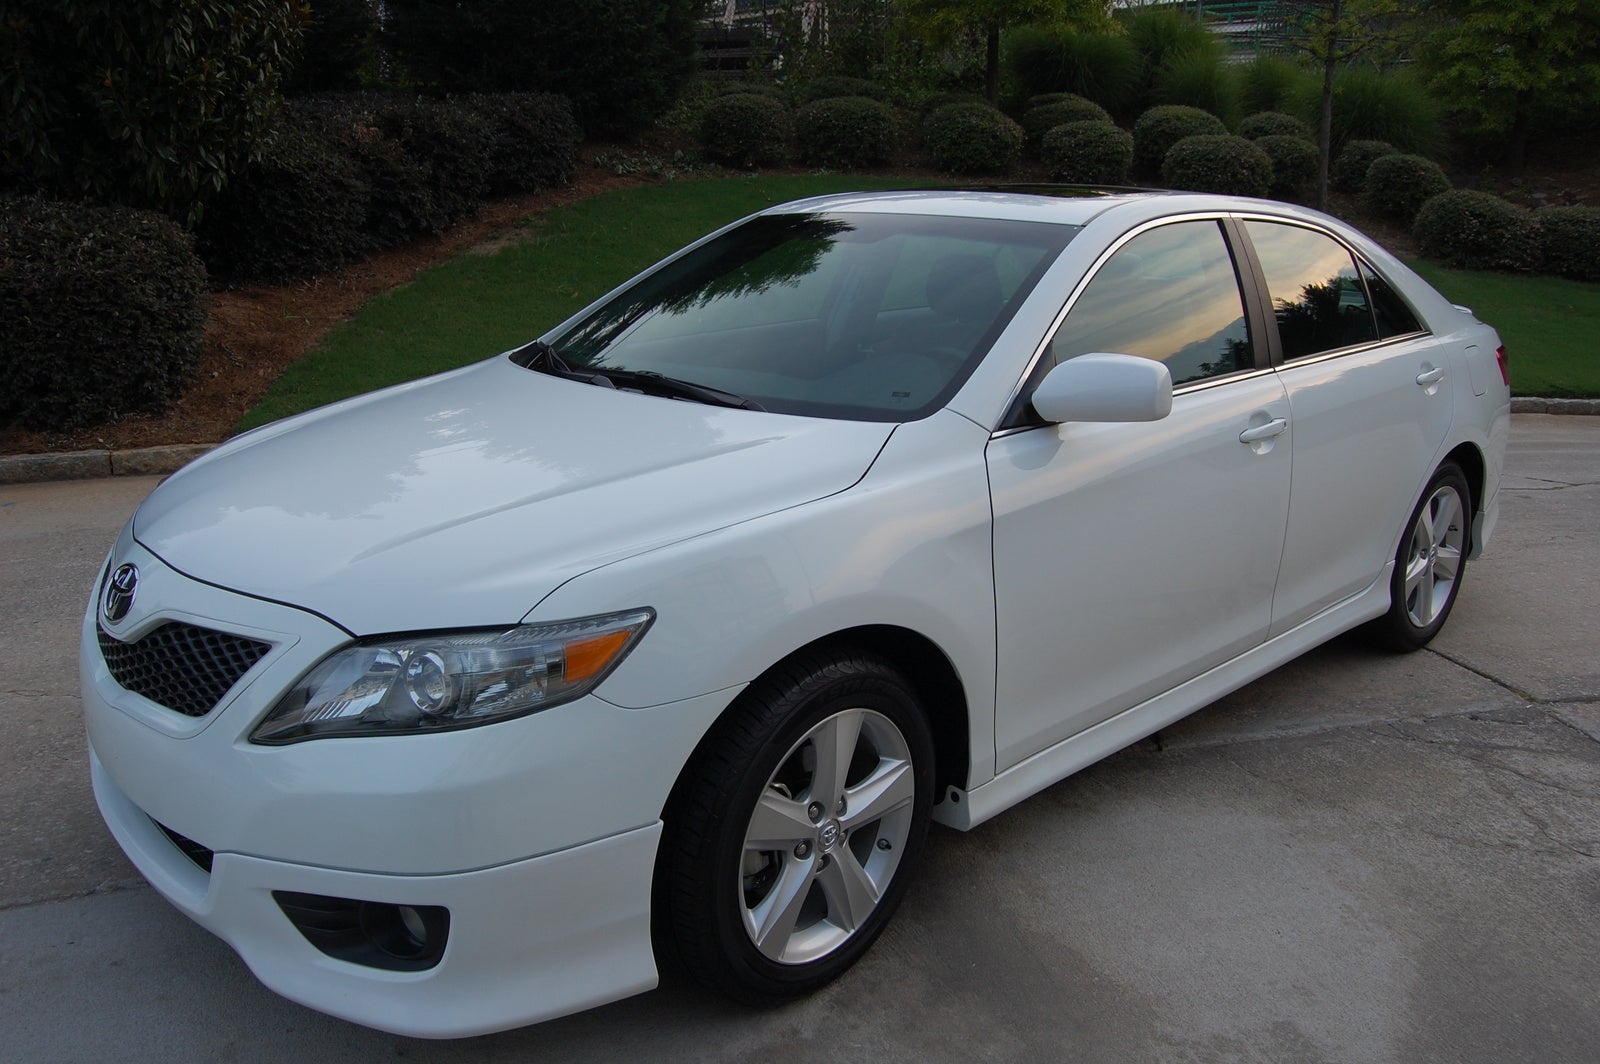 Toyota camry reviews and complaints